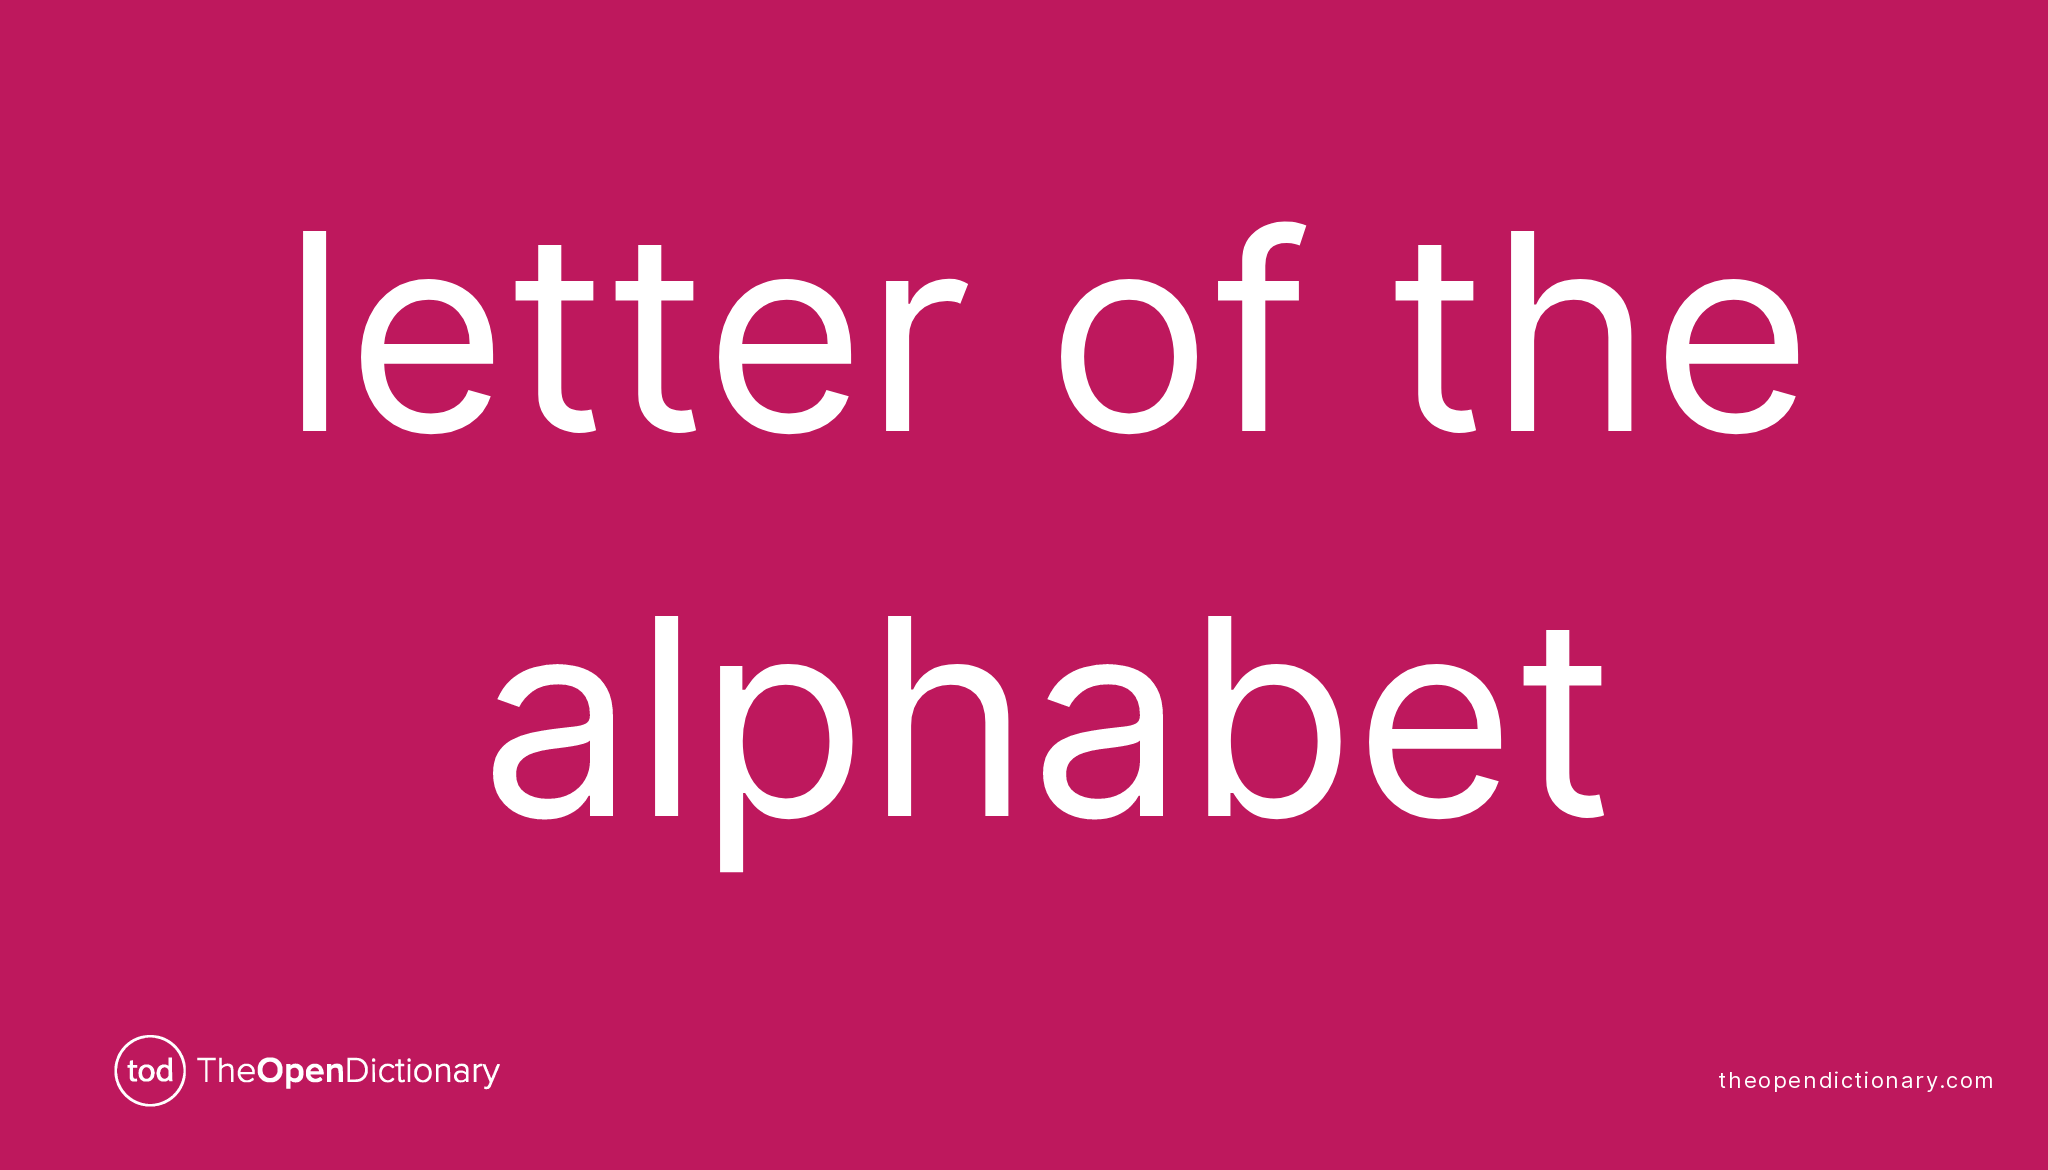 letter-of-the-alphabet-meaning-of-letter-of-the-alphabet-definition